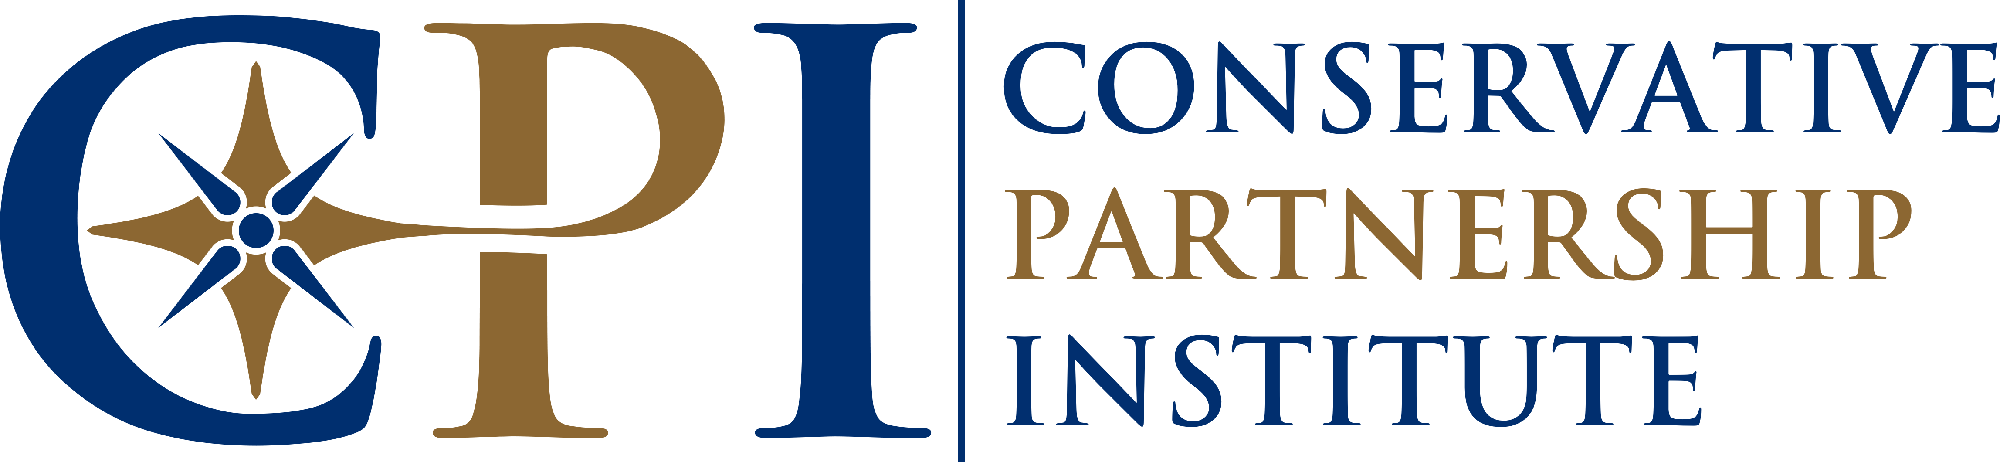 CPI-Conservative Partnership Institute- Election Integrity Network